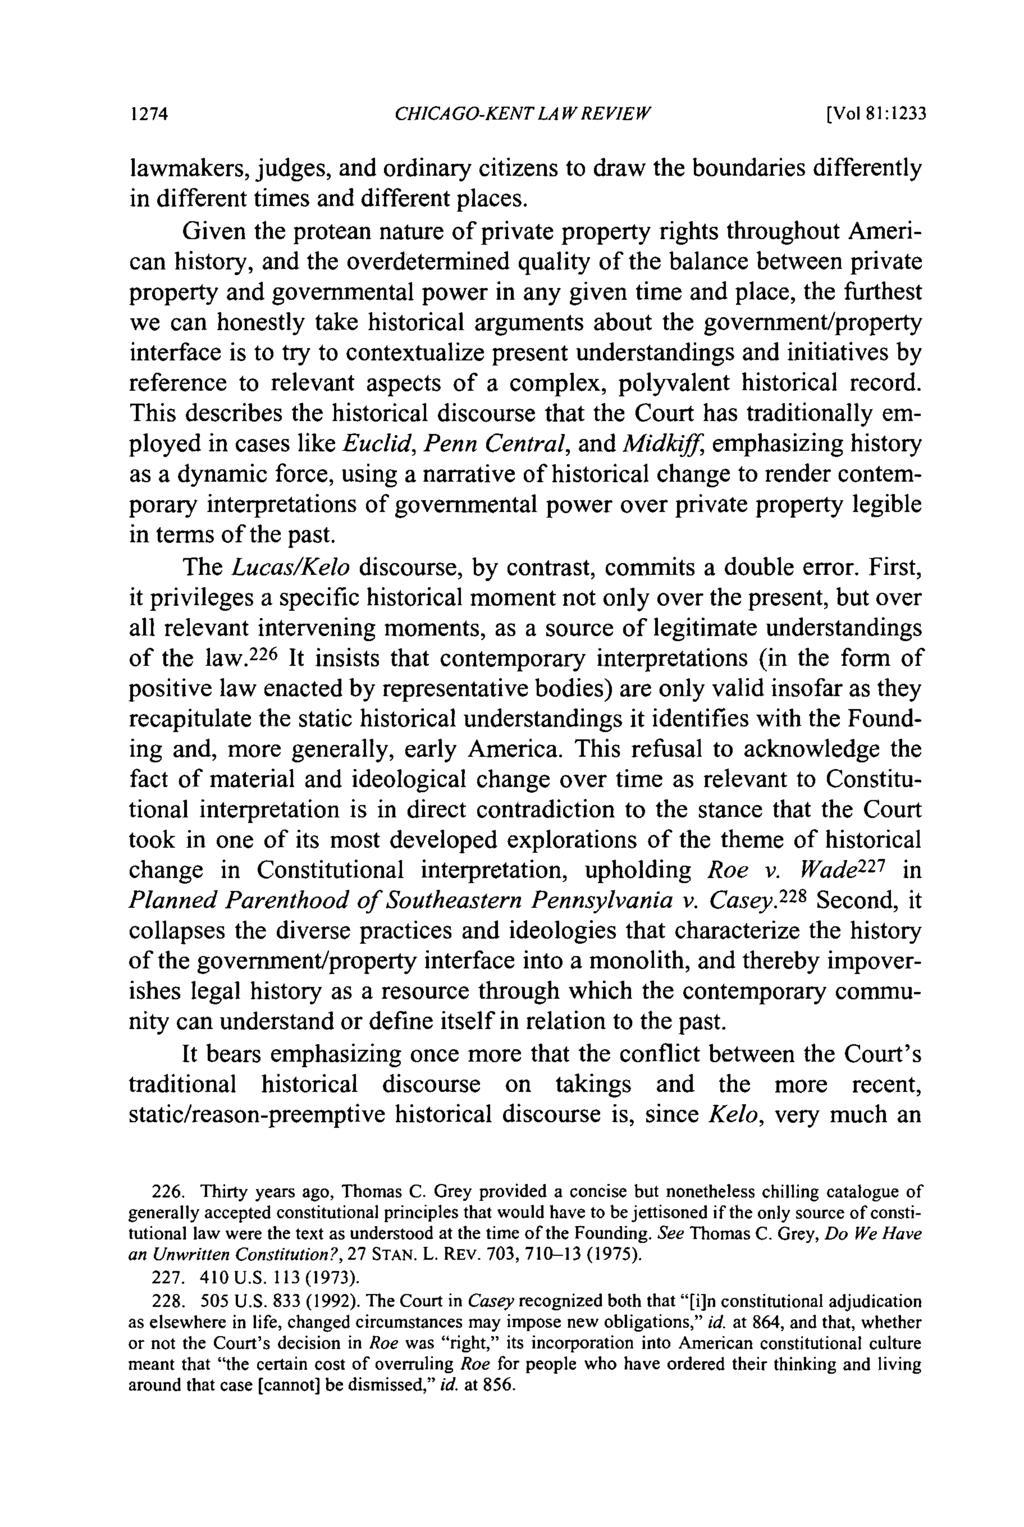 CHICAGO-KENT LAW REVIEW [Vol 8 1: 1233 lawmakers, judges, and ordinary citizens to draw the boundaries differently in different times and different places.